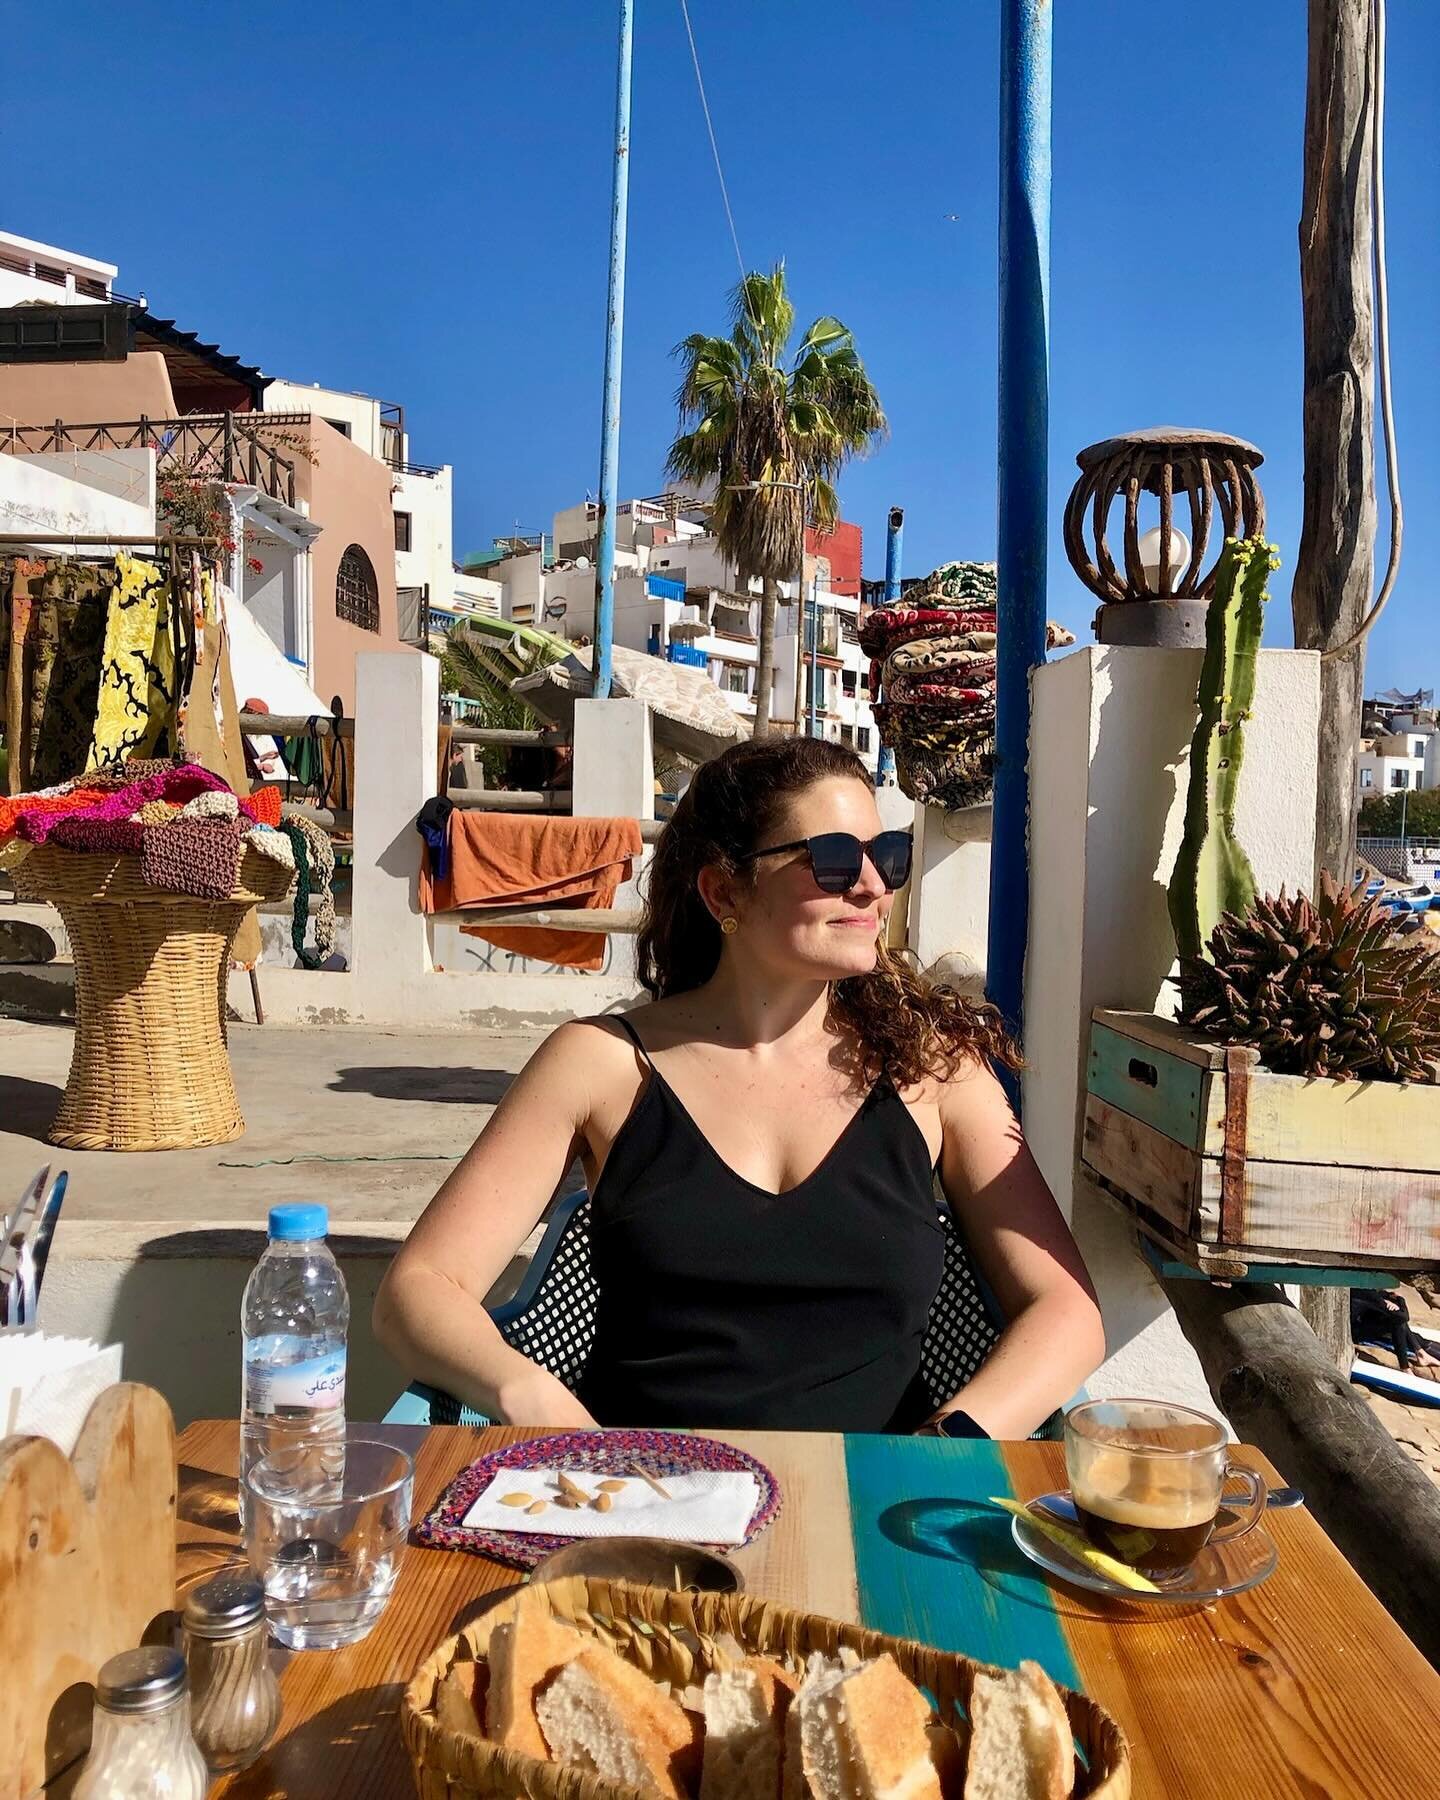 🇲🇦 A Moroccan weekend featuring tajine, camels, kitties, hiking, and lots of time soaking in all of the Vitamin D I was missing in London. Taghazout had the most beautiful, peaceful vibe with the loveliest people. I told myself this year that I wou